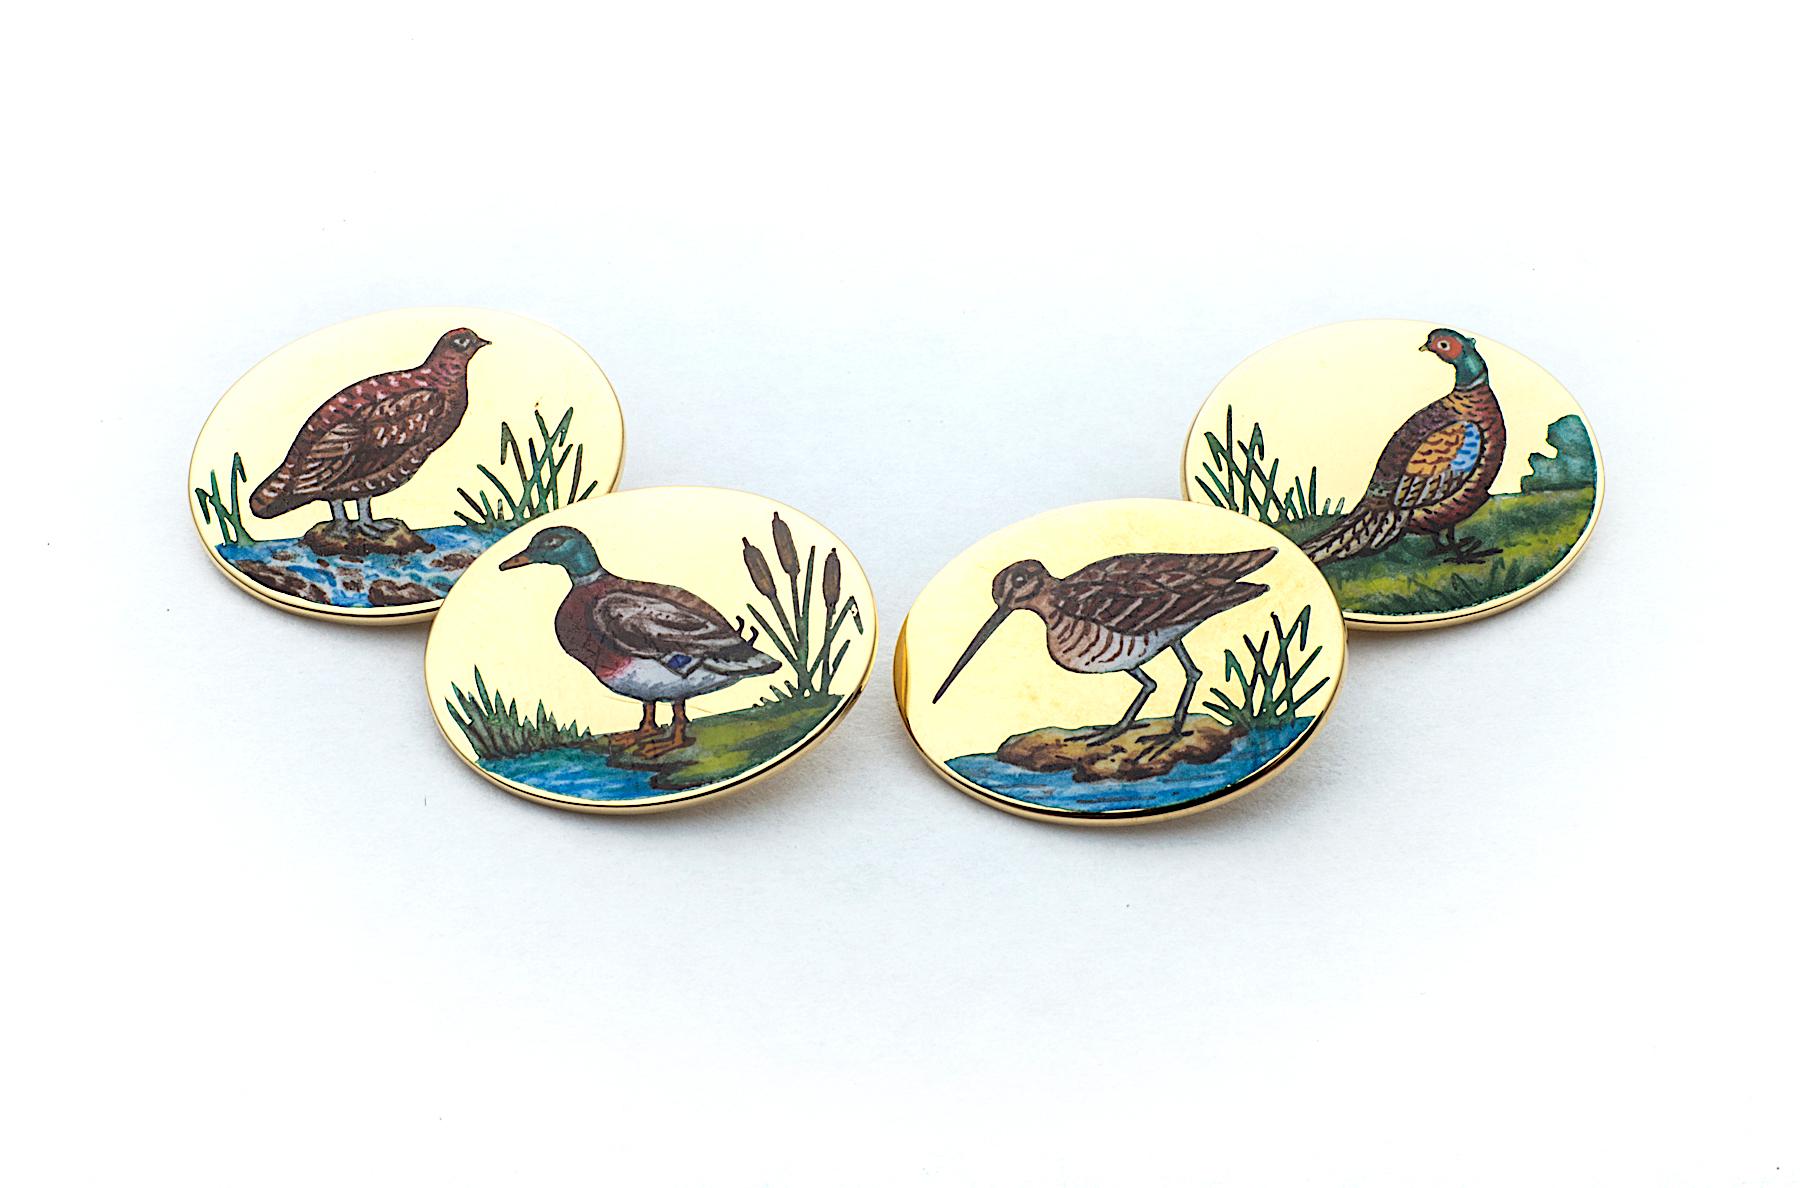 Let the games begin with these vintage Longmire 18 karat yellow gold enamel gamebird cufflinks that are guaranteed to always give you the winning edge.  Hand enameled by old world craftsmen, these one-of-a-kind oval chain link cufflinks feature four